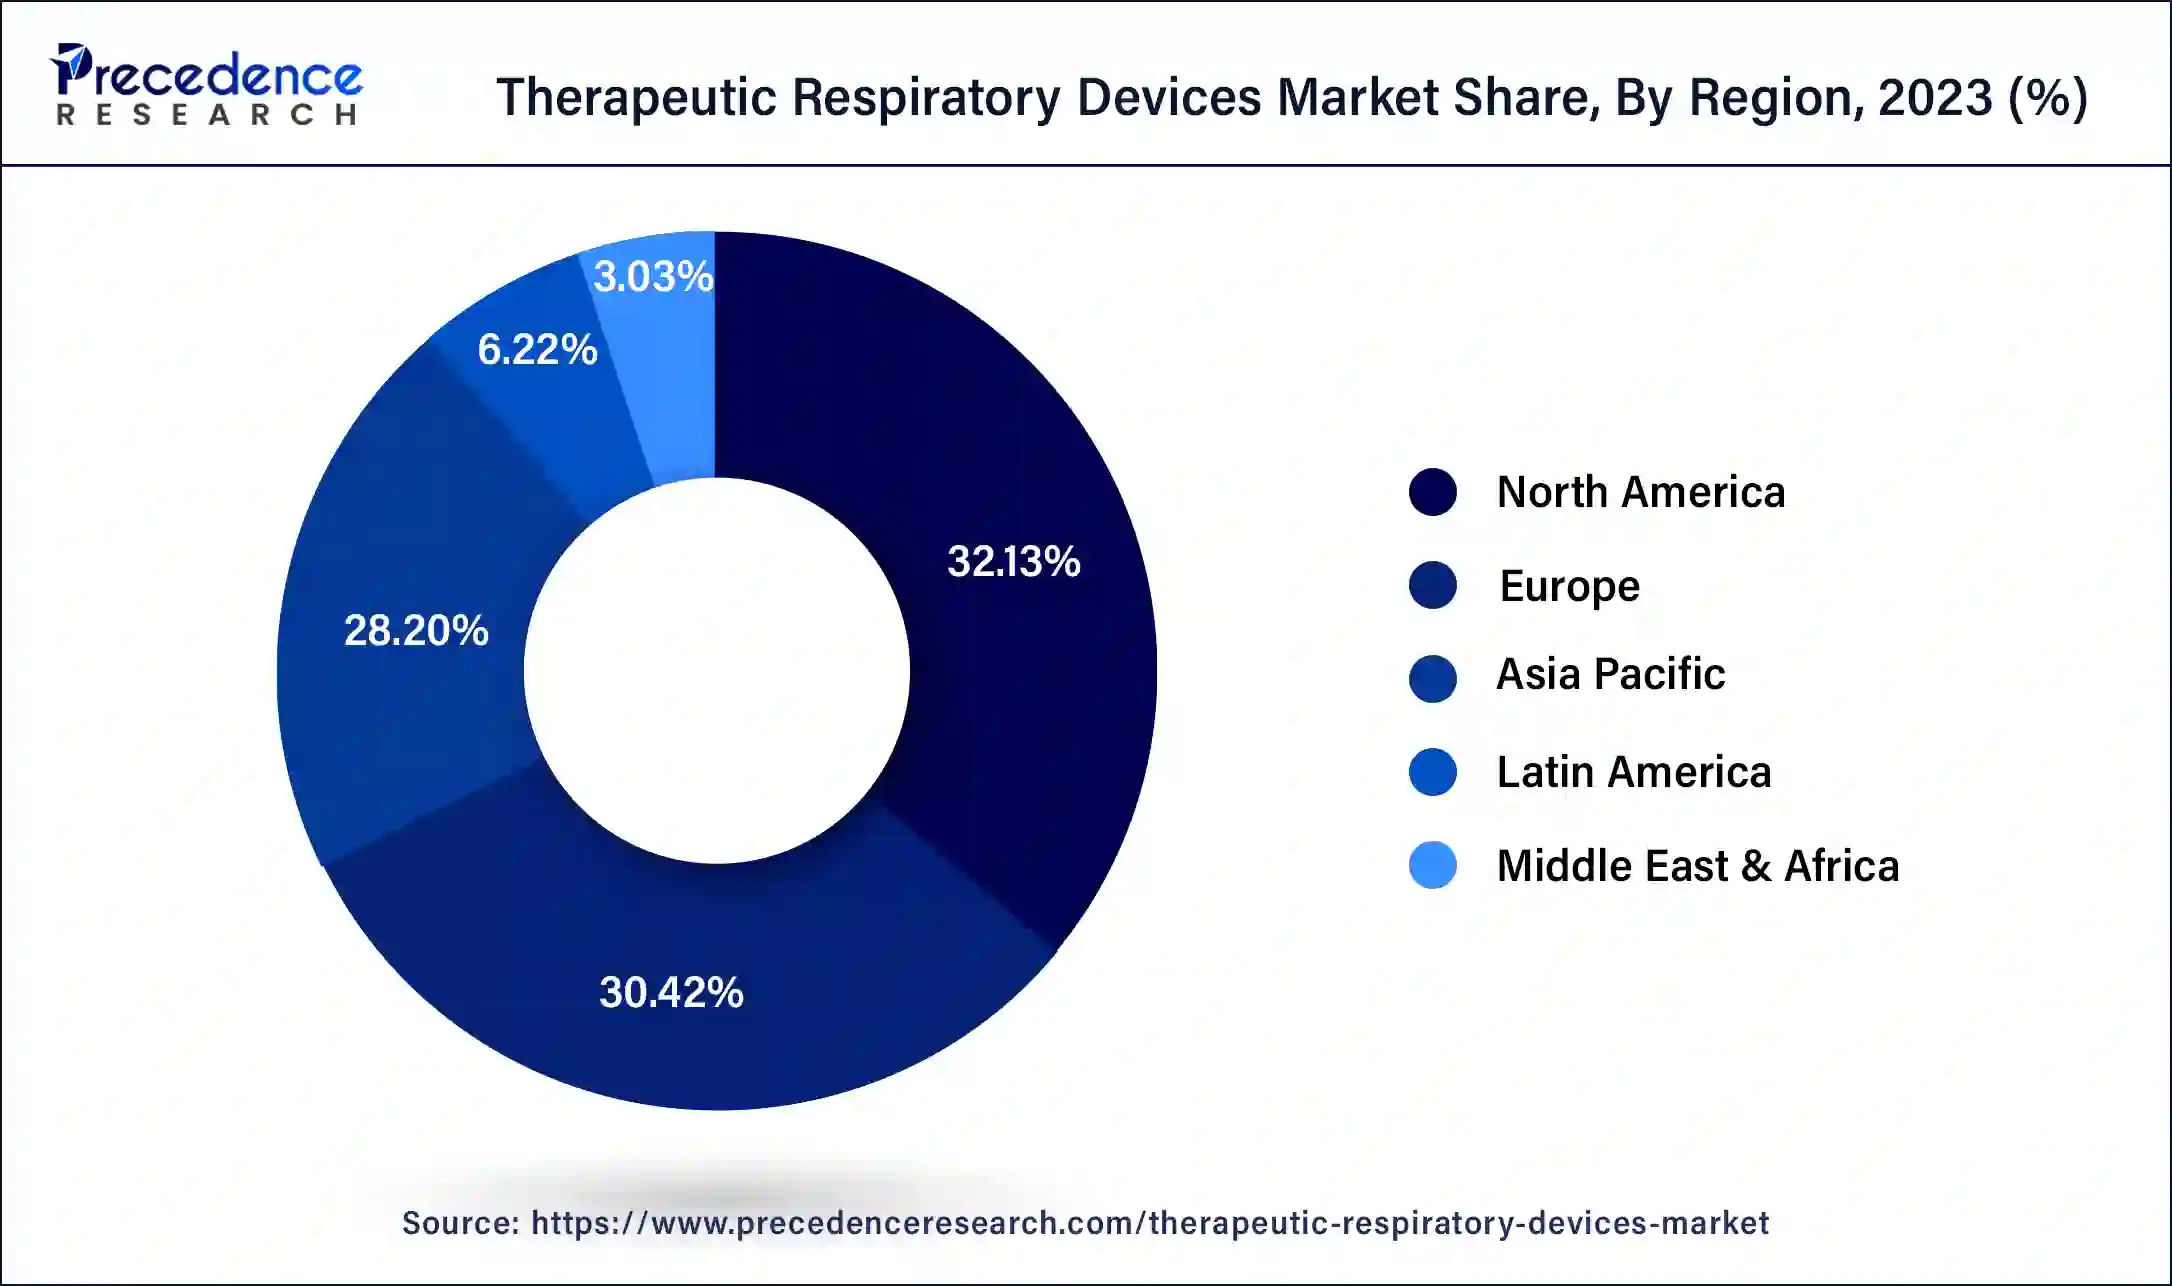 Therapeutic Respiratory Devices Market Share, By Region, 20223(%)